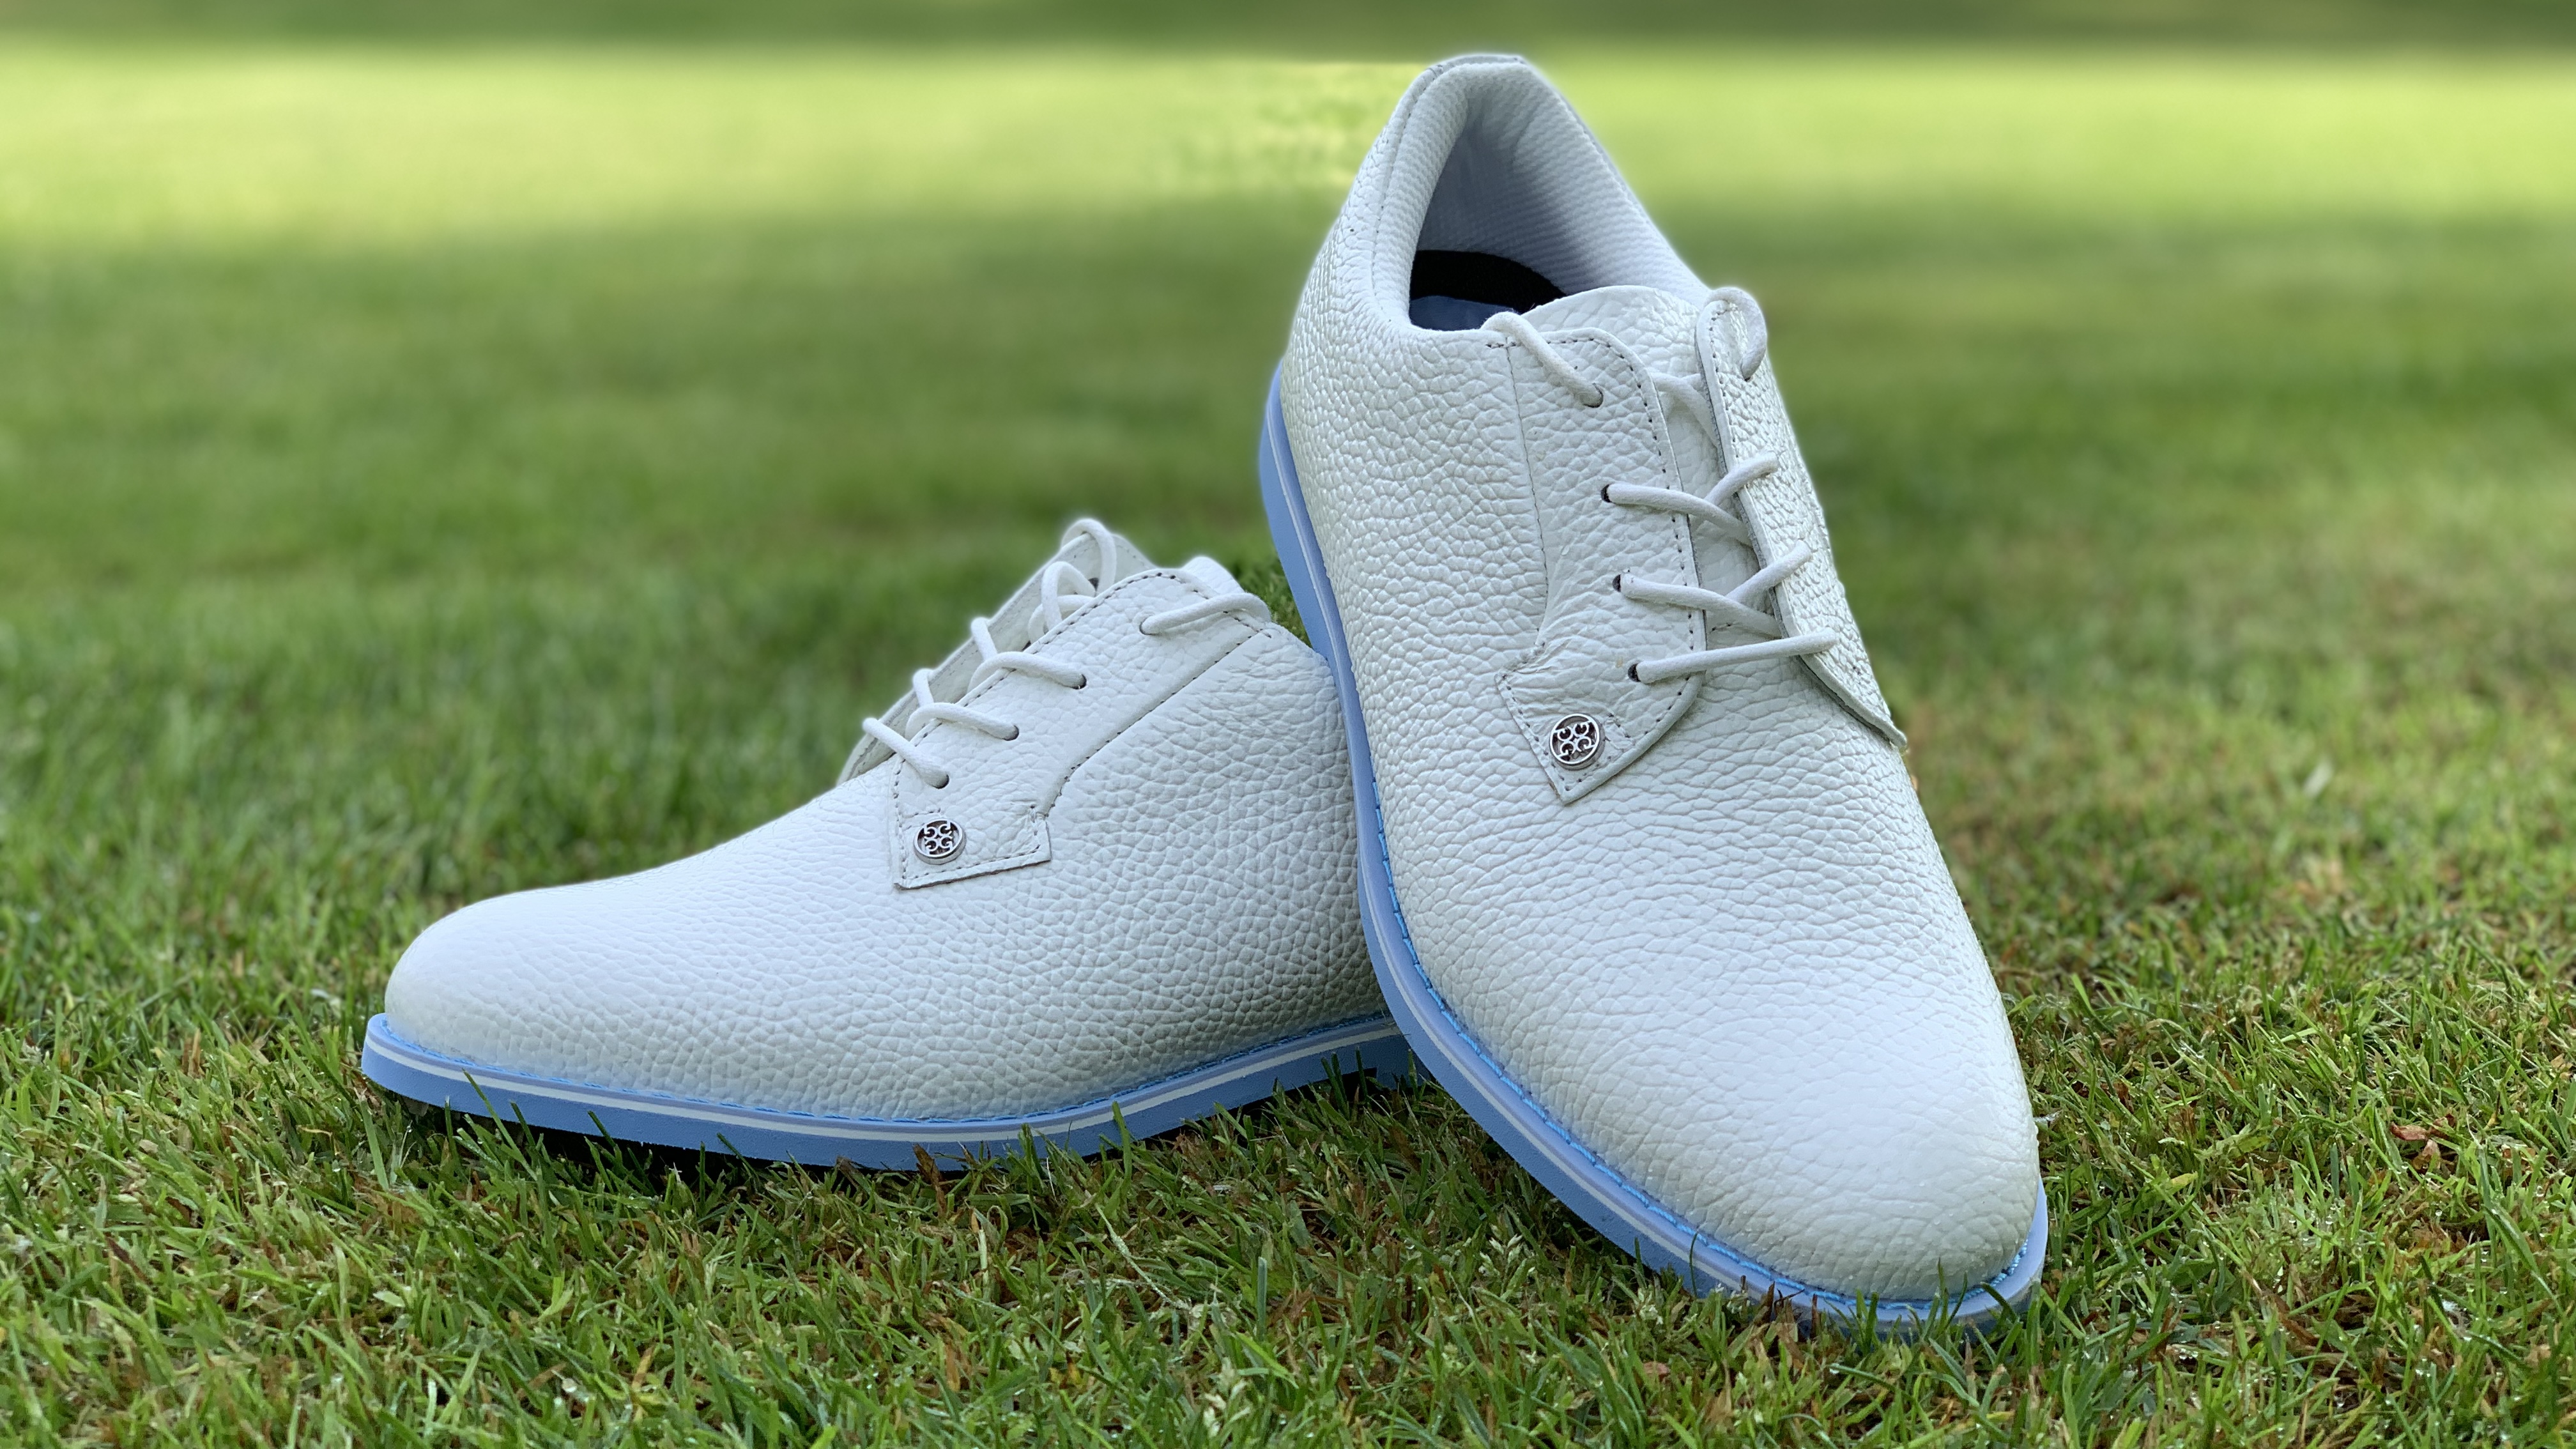 G/Fore Women's Gallivanter Shoes Review